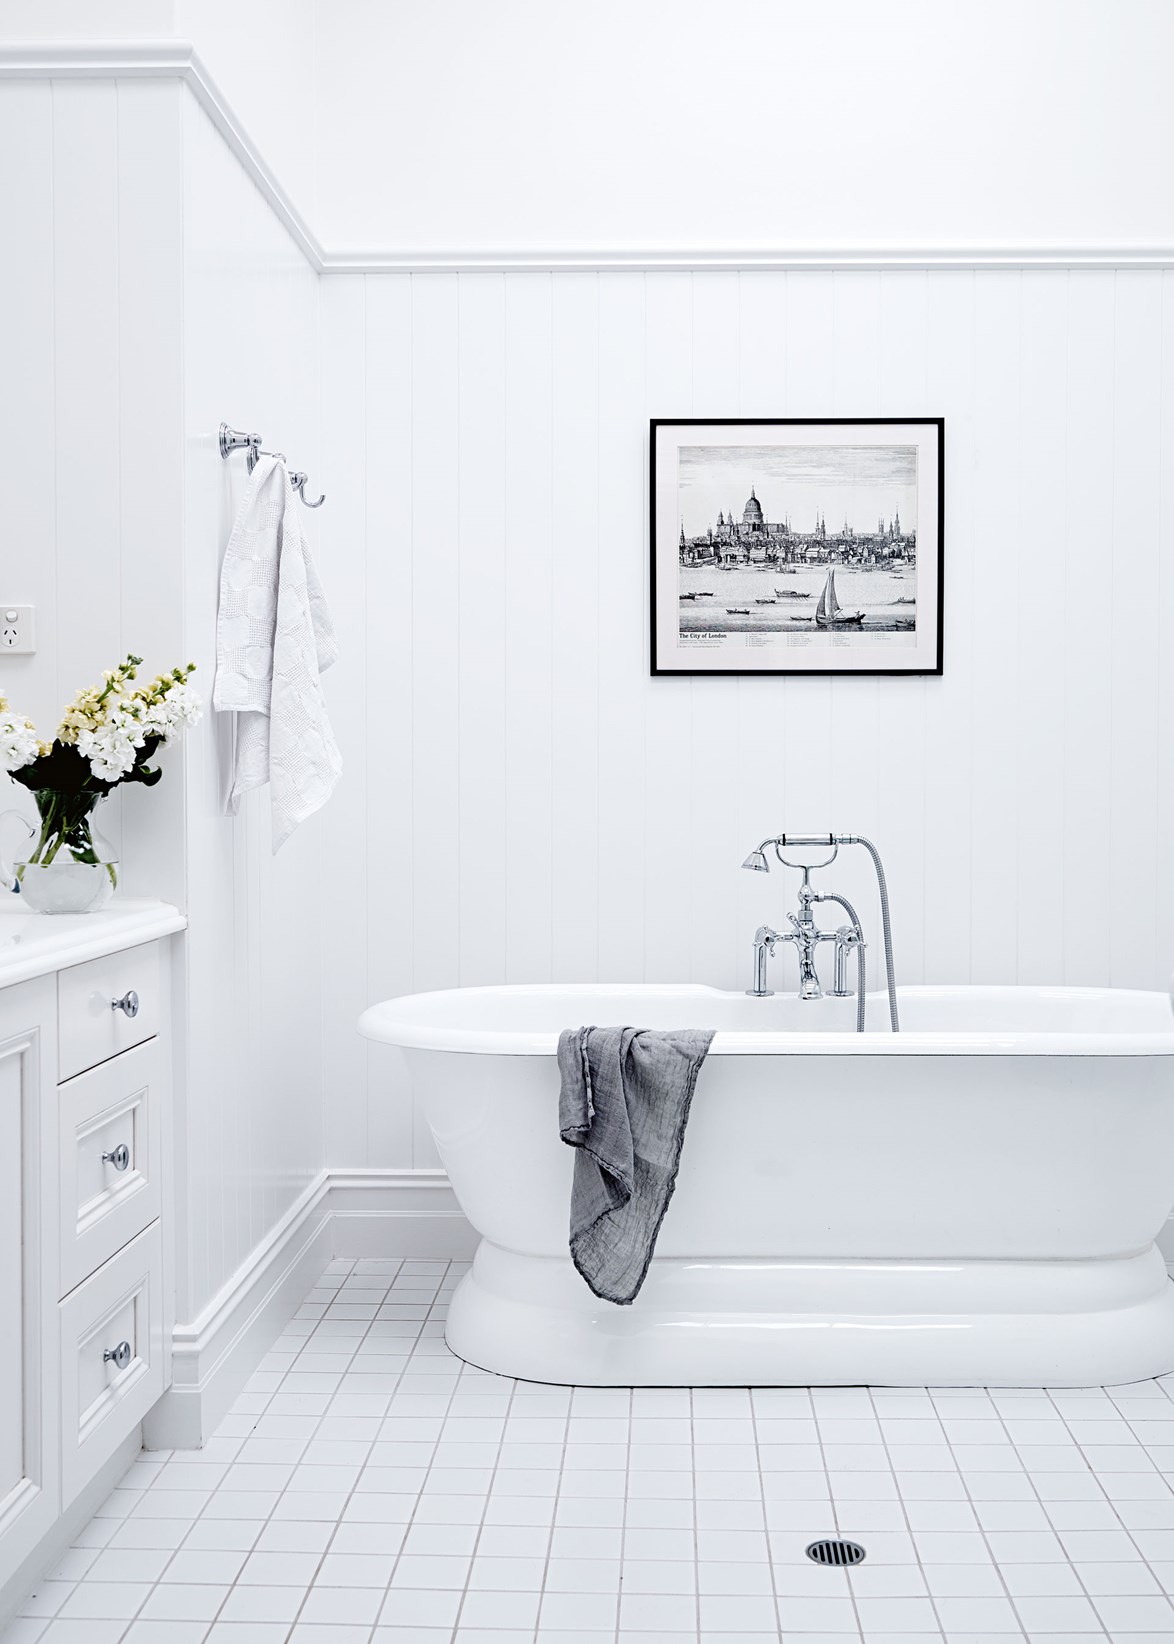 White is a key ingredient in the transformation of [this 19th-century stone homestead](https://www.homestolove.com.au/classic-contemporary-homestead-13411|target="_blank") and the bathroom is no exception. Keeping things simple with chrome accessories and a black and white art print above it, the bath takes centre stage.